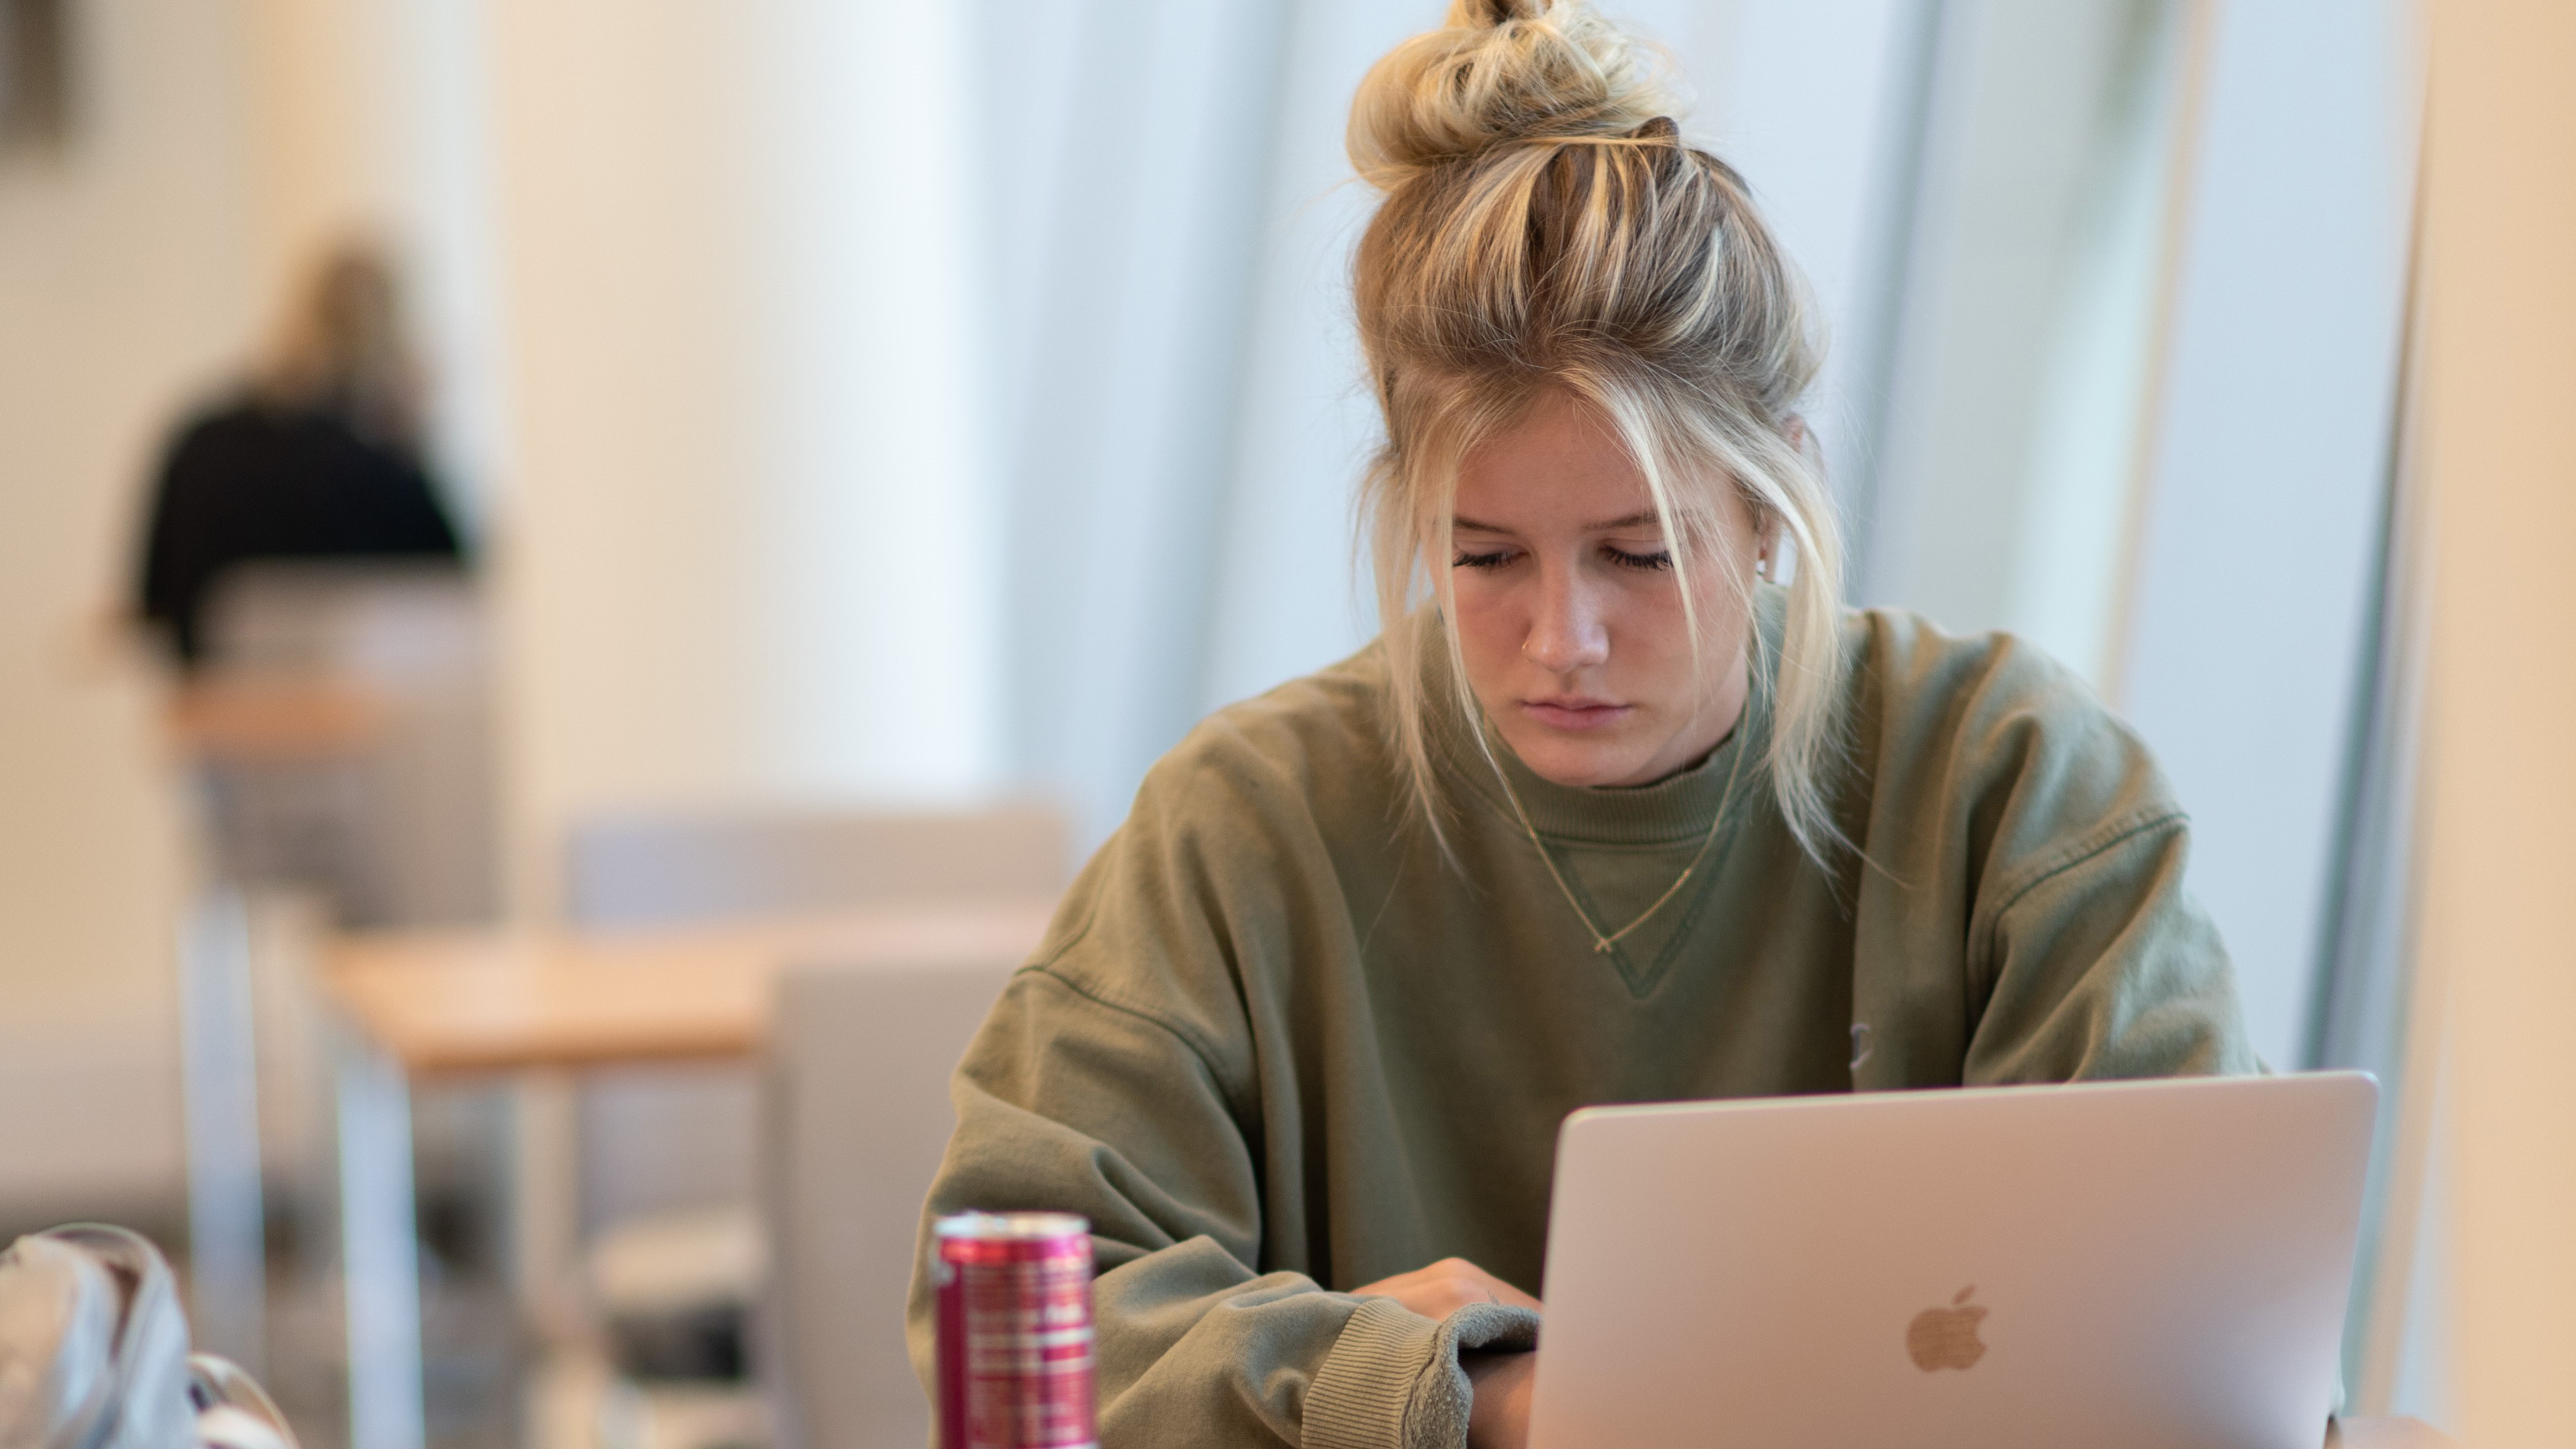 Female student on her computer